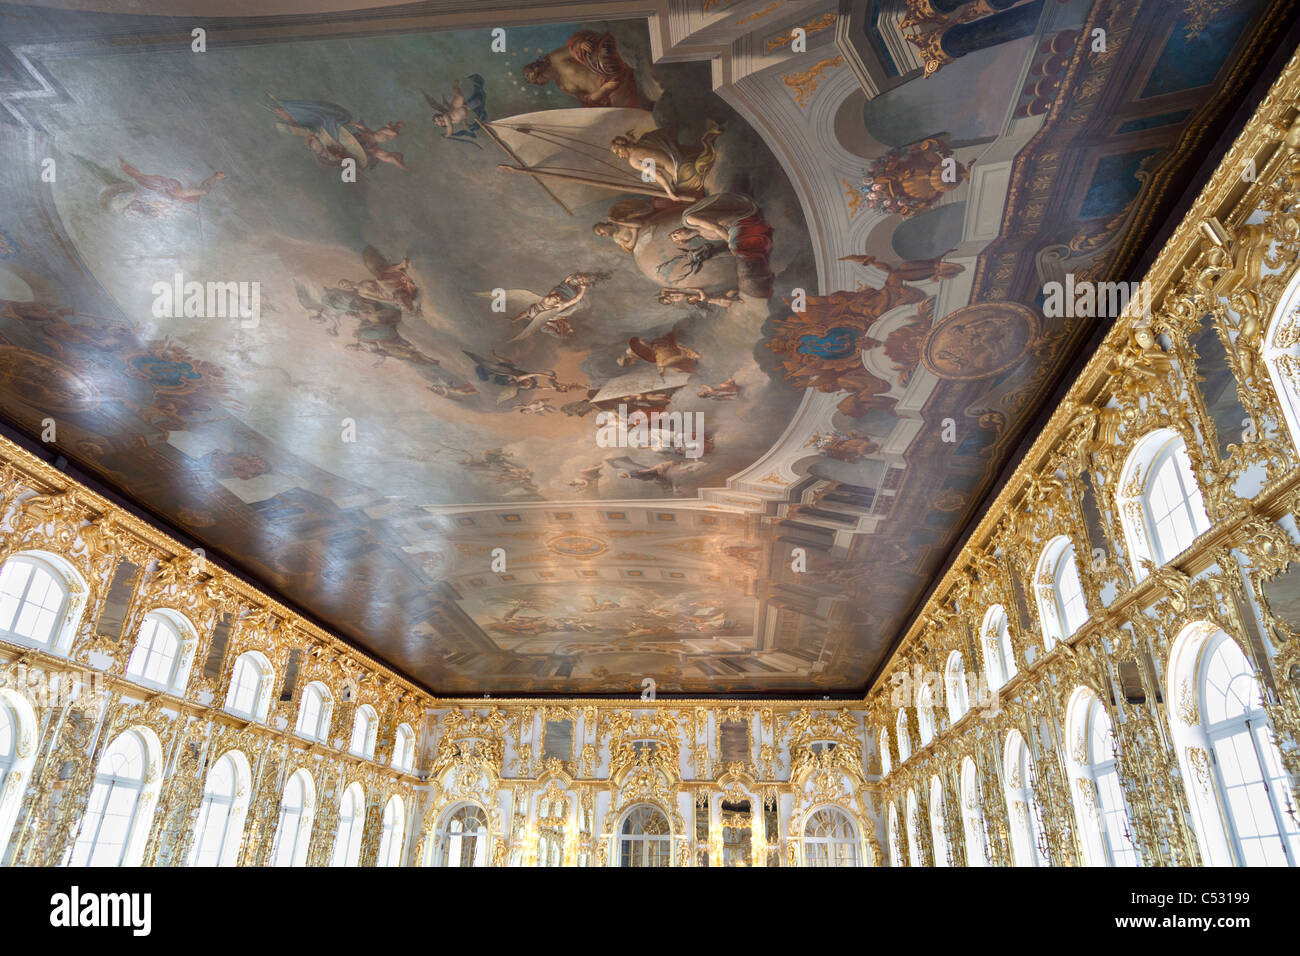 The Catherine Palace, St Petersburg Russia - Great Ballroom 4 Stock Photo